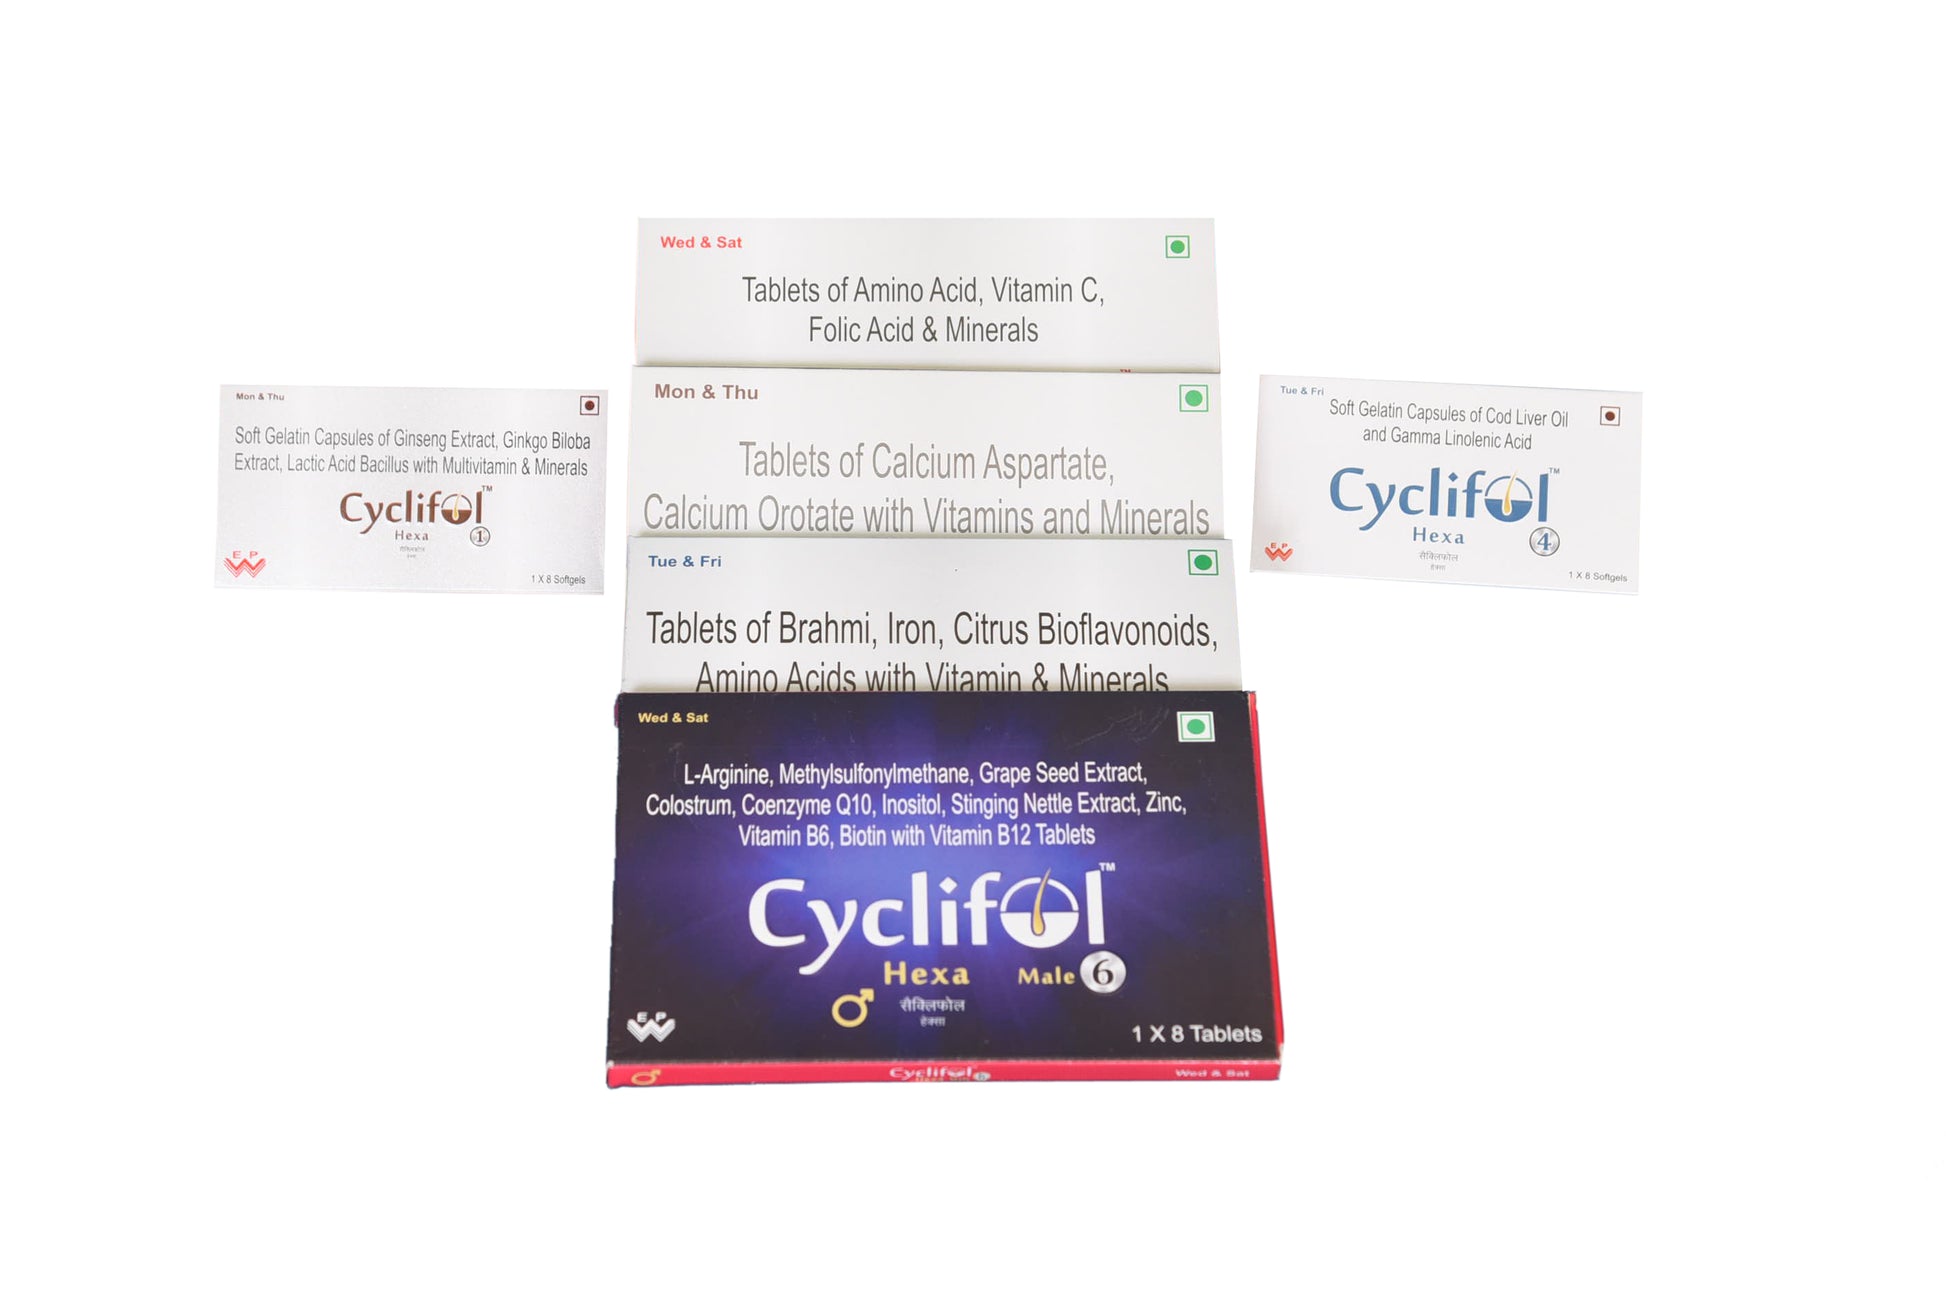 Cyclifol Hexa Male is specially designed kit for hair growth stopping hair loss and for Increase in hair Density developed by East West Pharma .